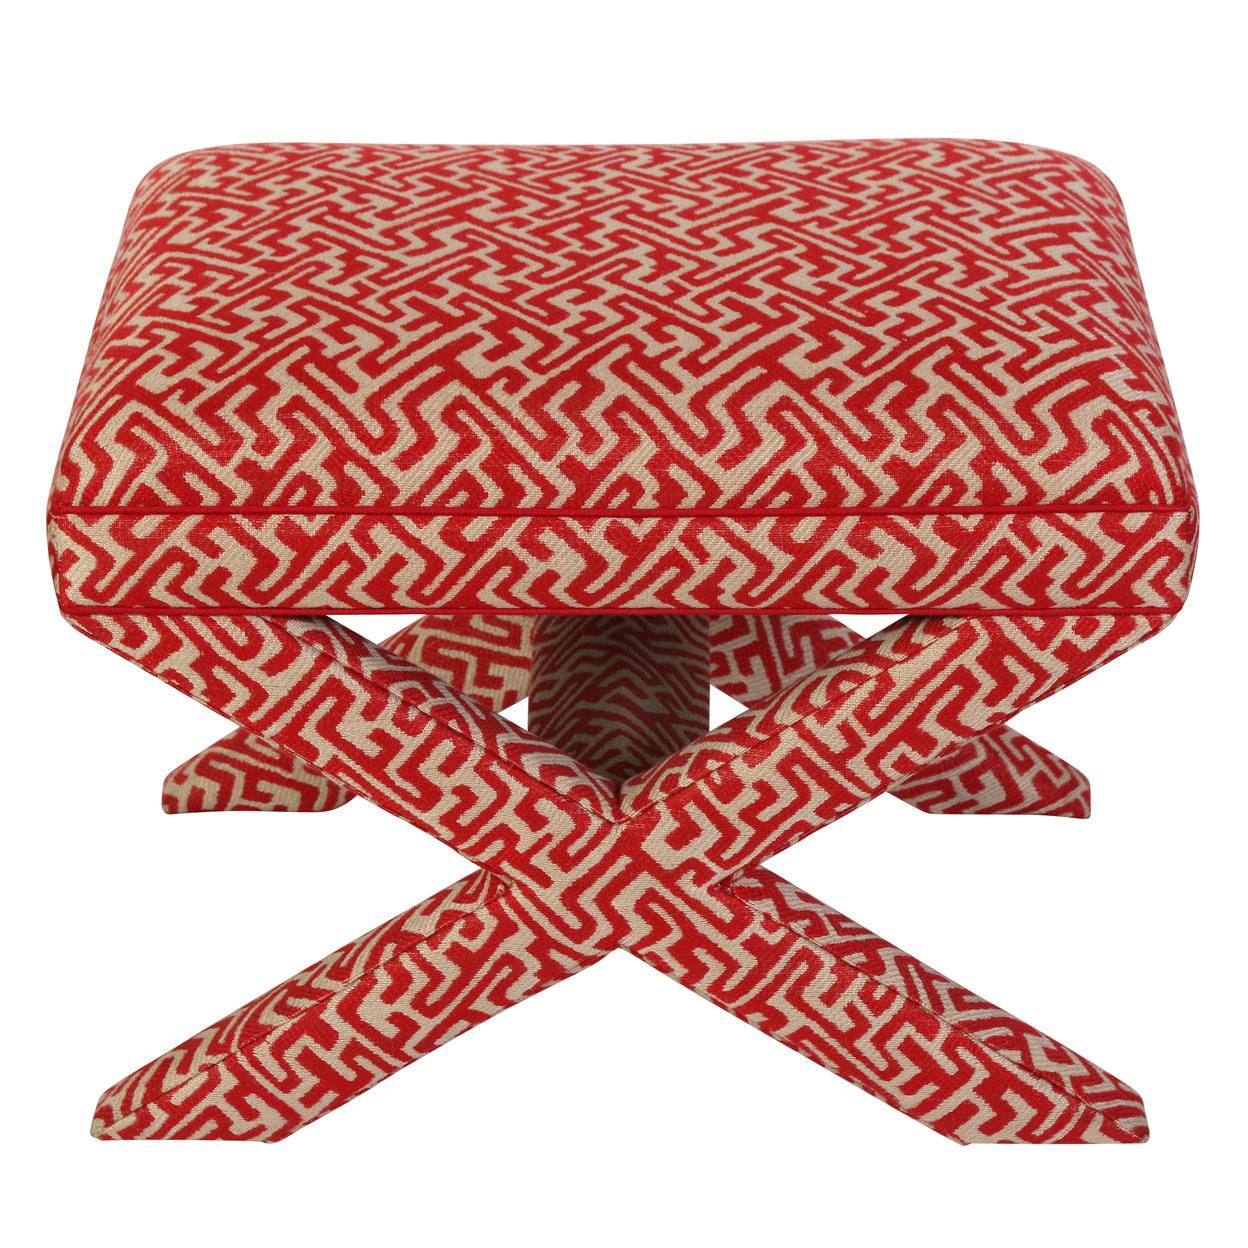 A small ottoman with x-form legs covered in a bright red and white fabric with a Greek key design.  Perfect as a foot stool or a spot to perch books, this little gem will brighten up any room!